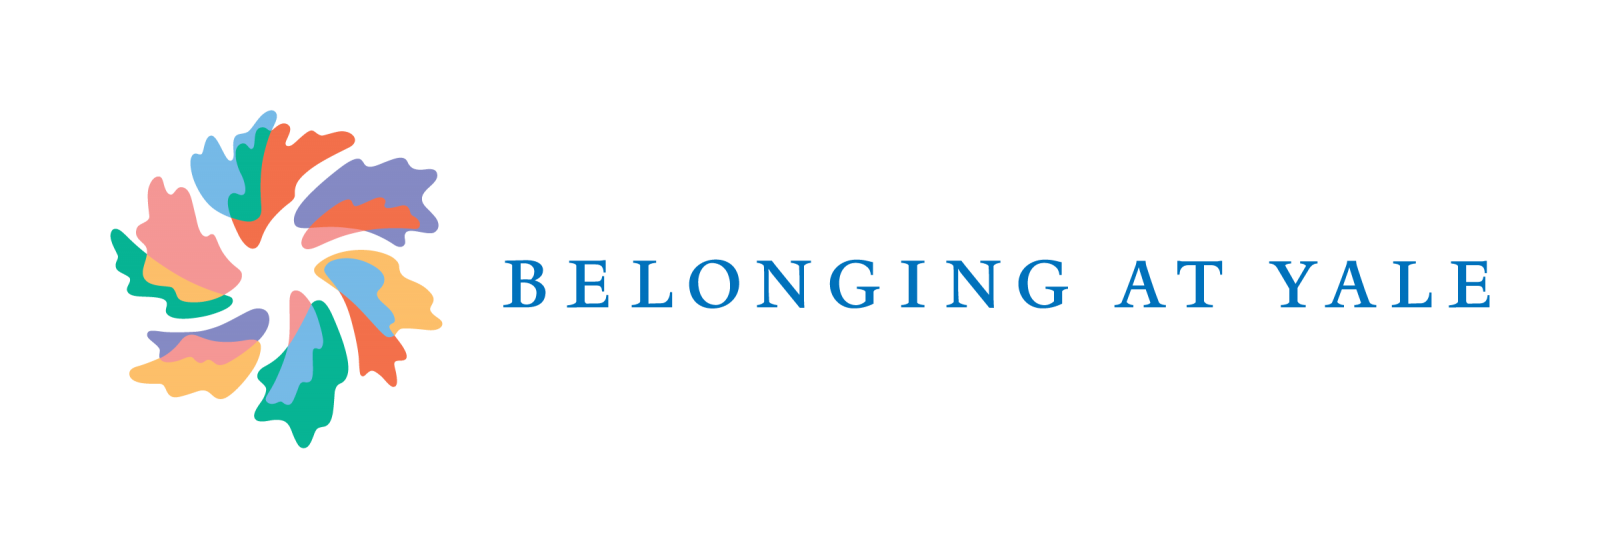 Belonging at Yale logo with colorful icon